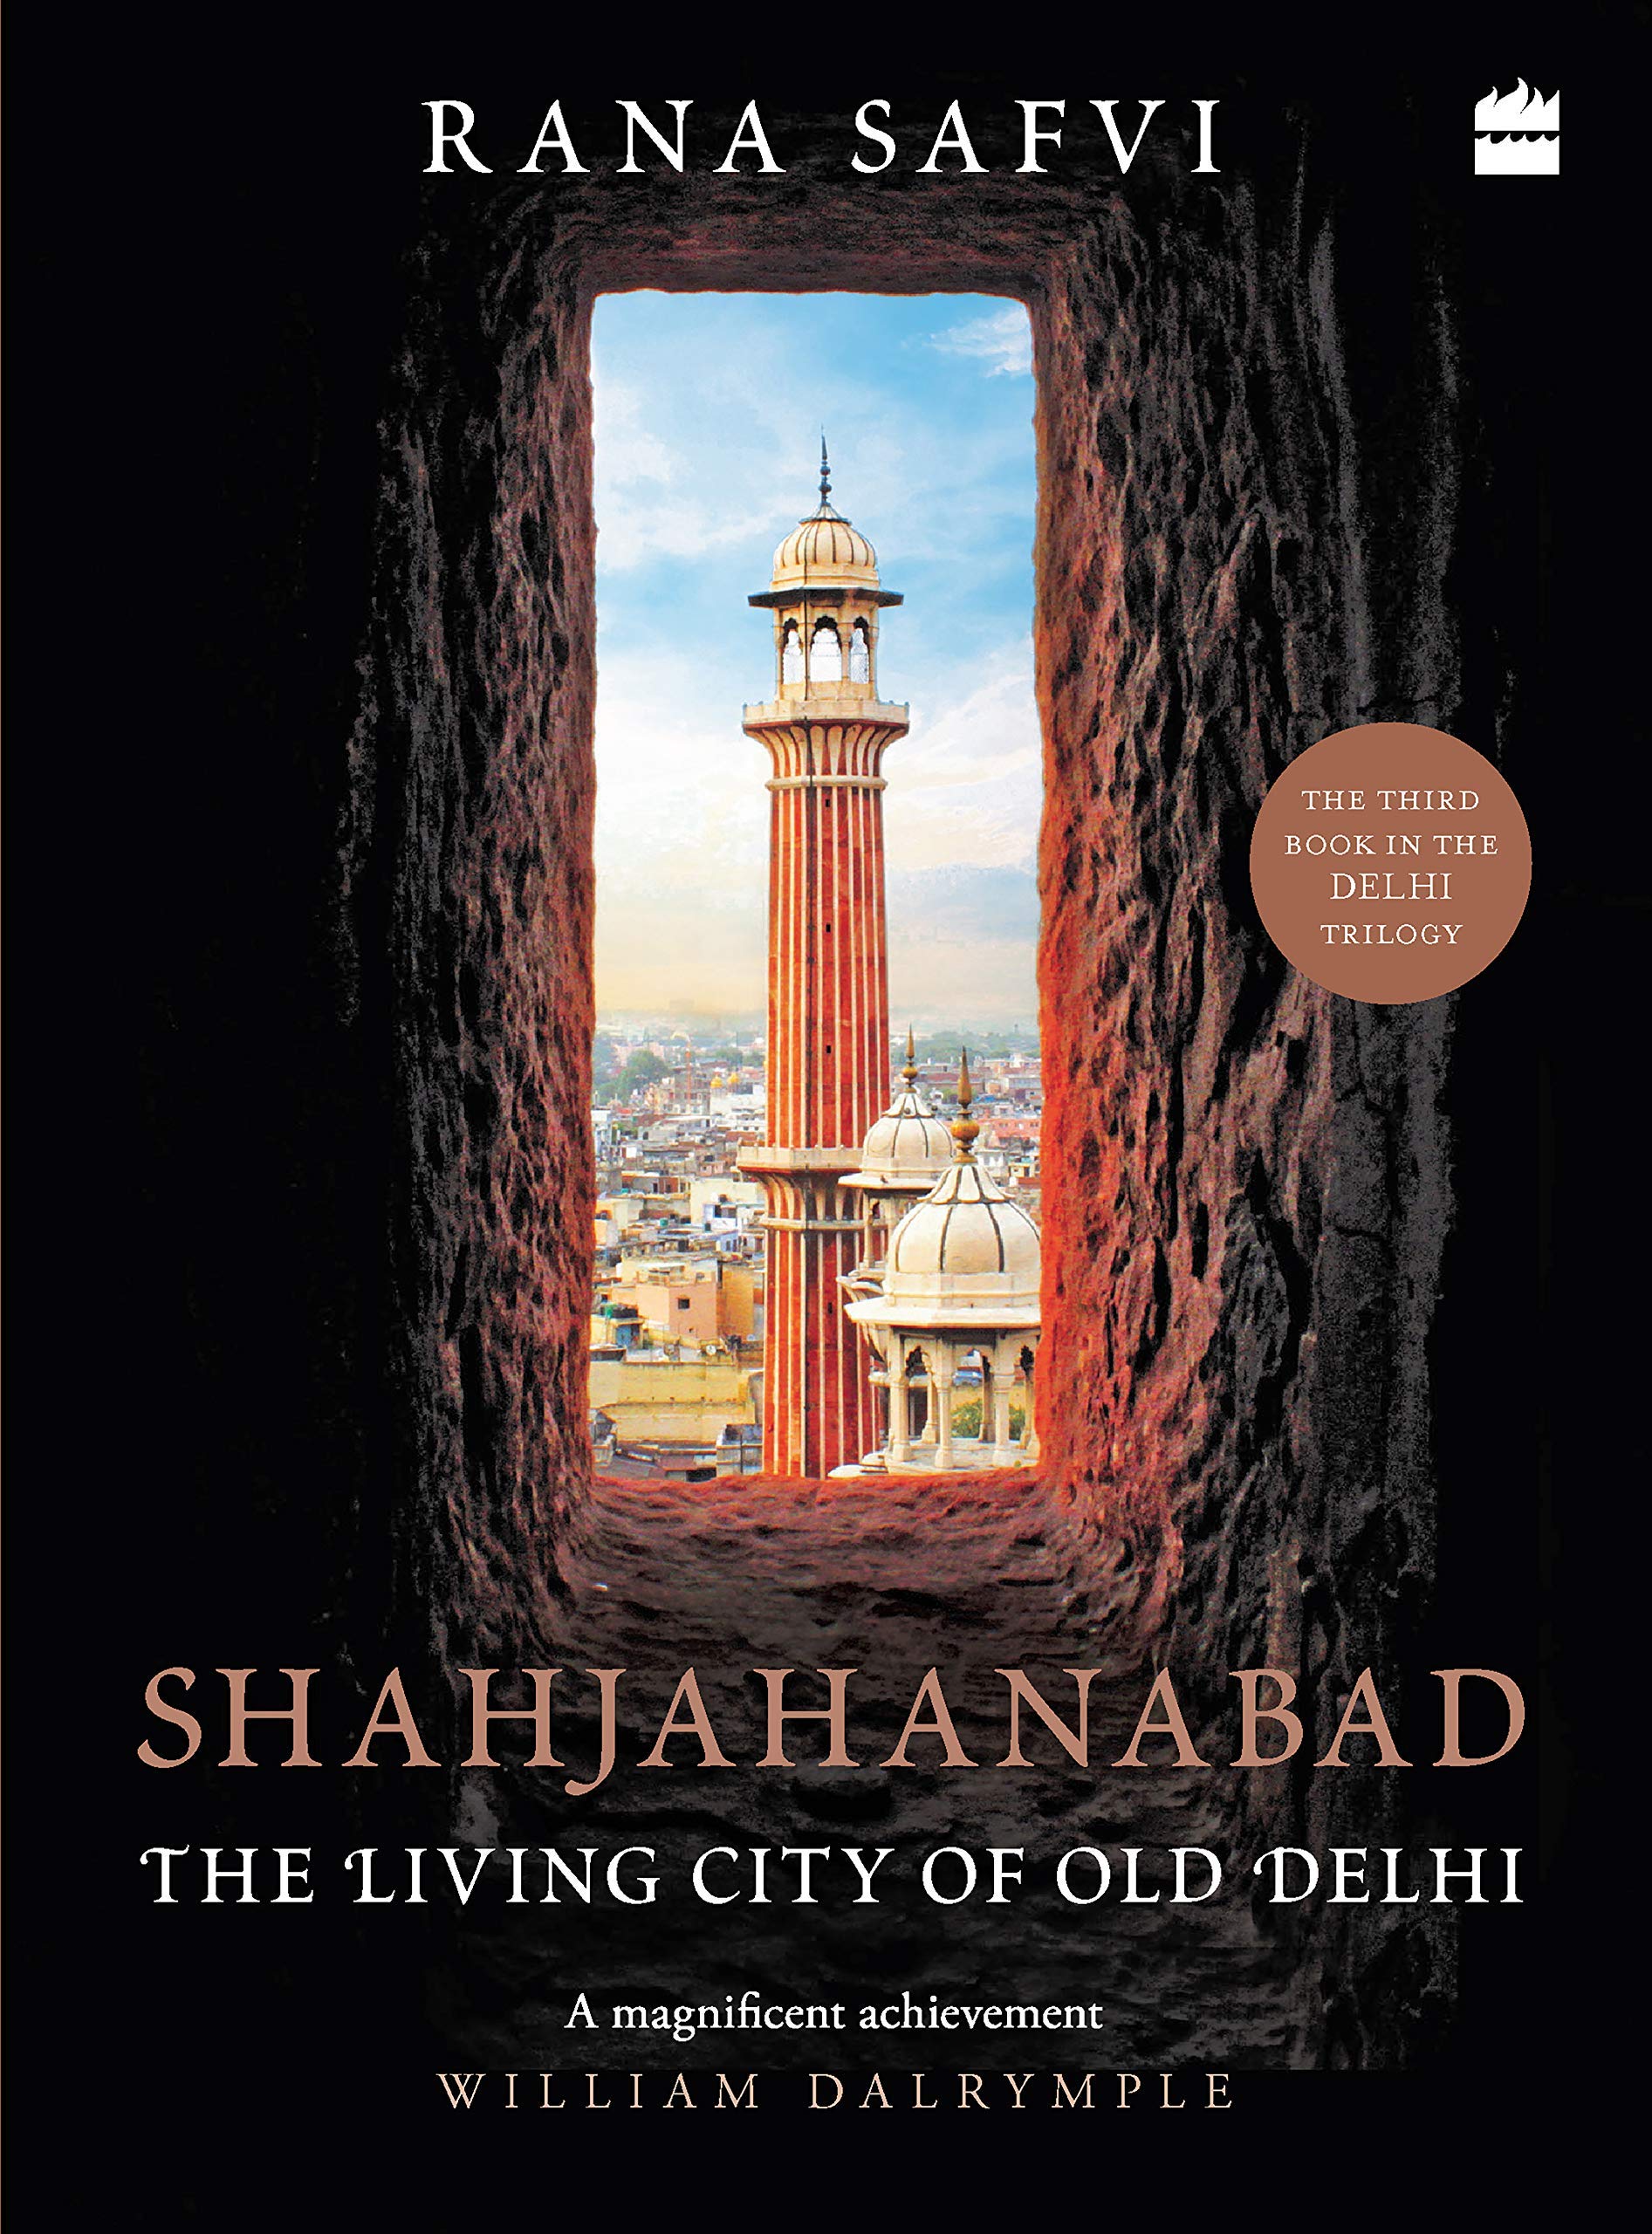 Shahjahanabad: The Living City of Old Delhi